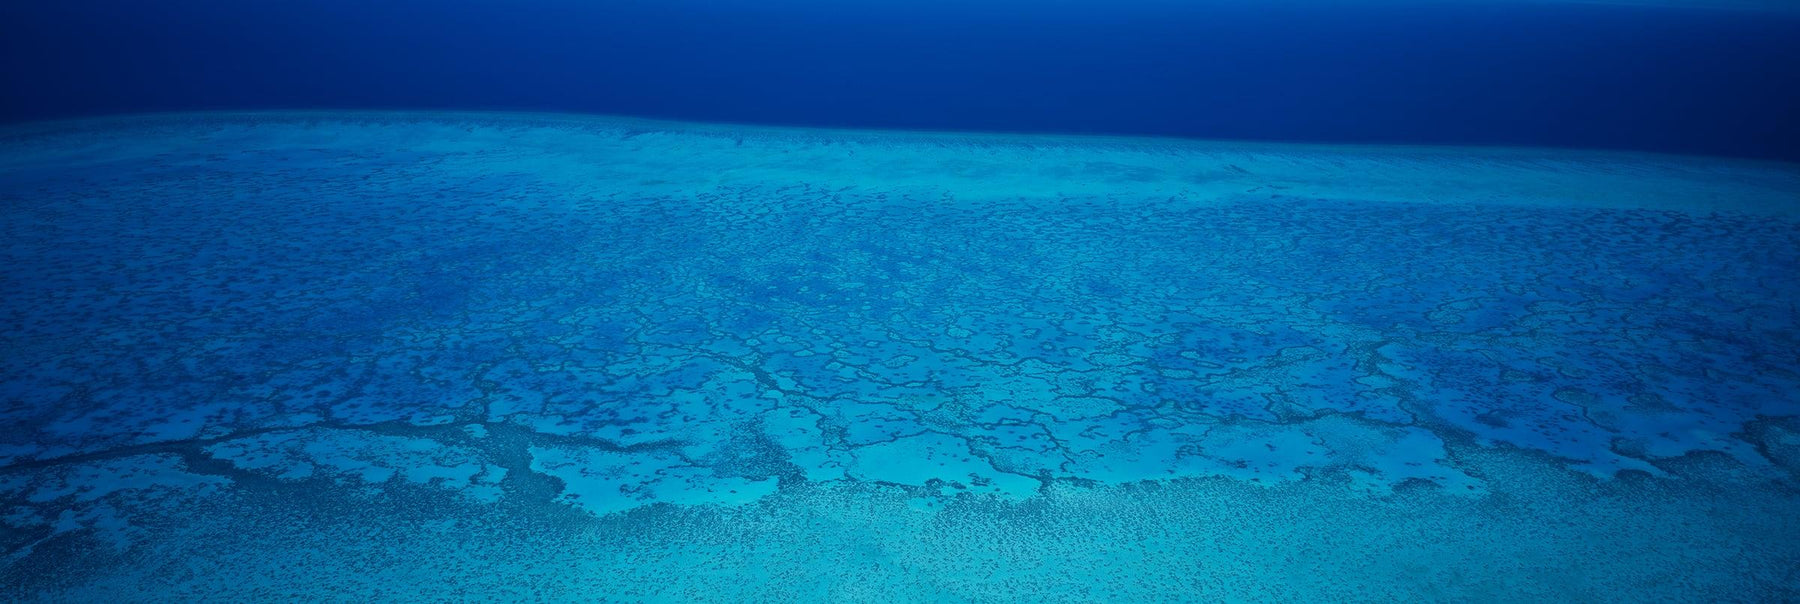 Aerial view of the Great Barrier Reef and ocean in Queensland Australia